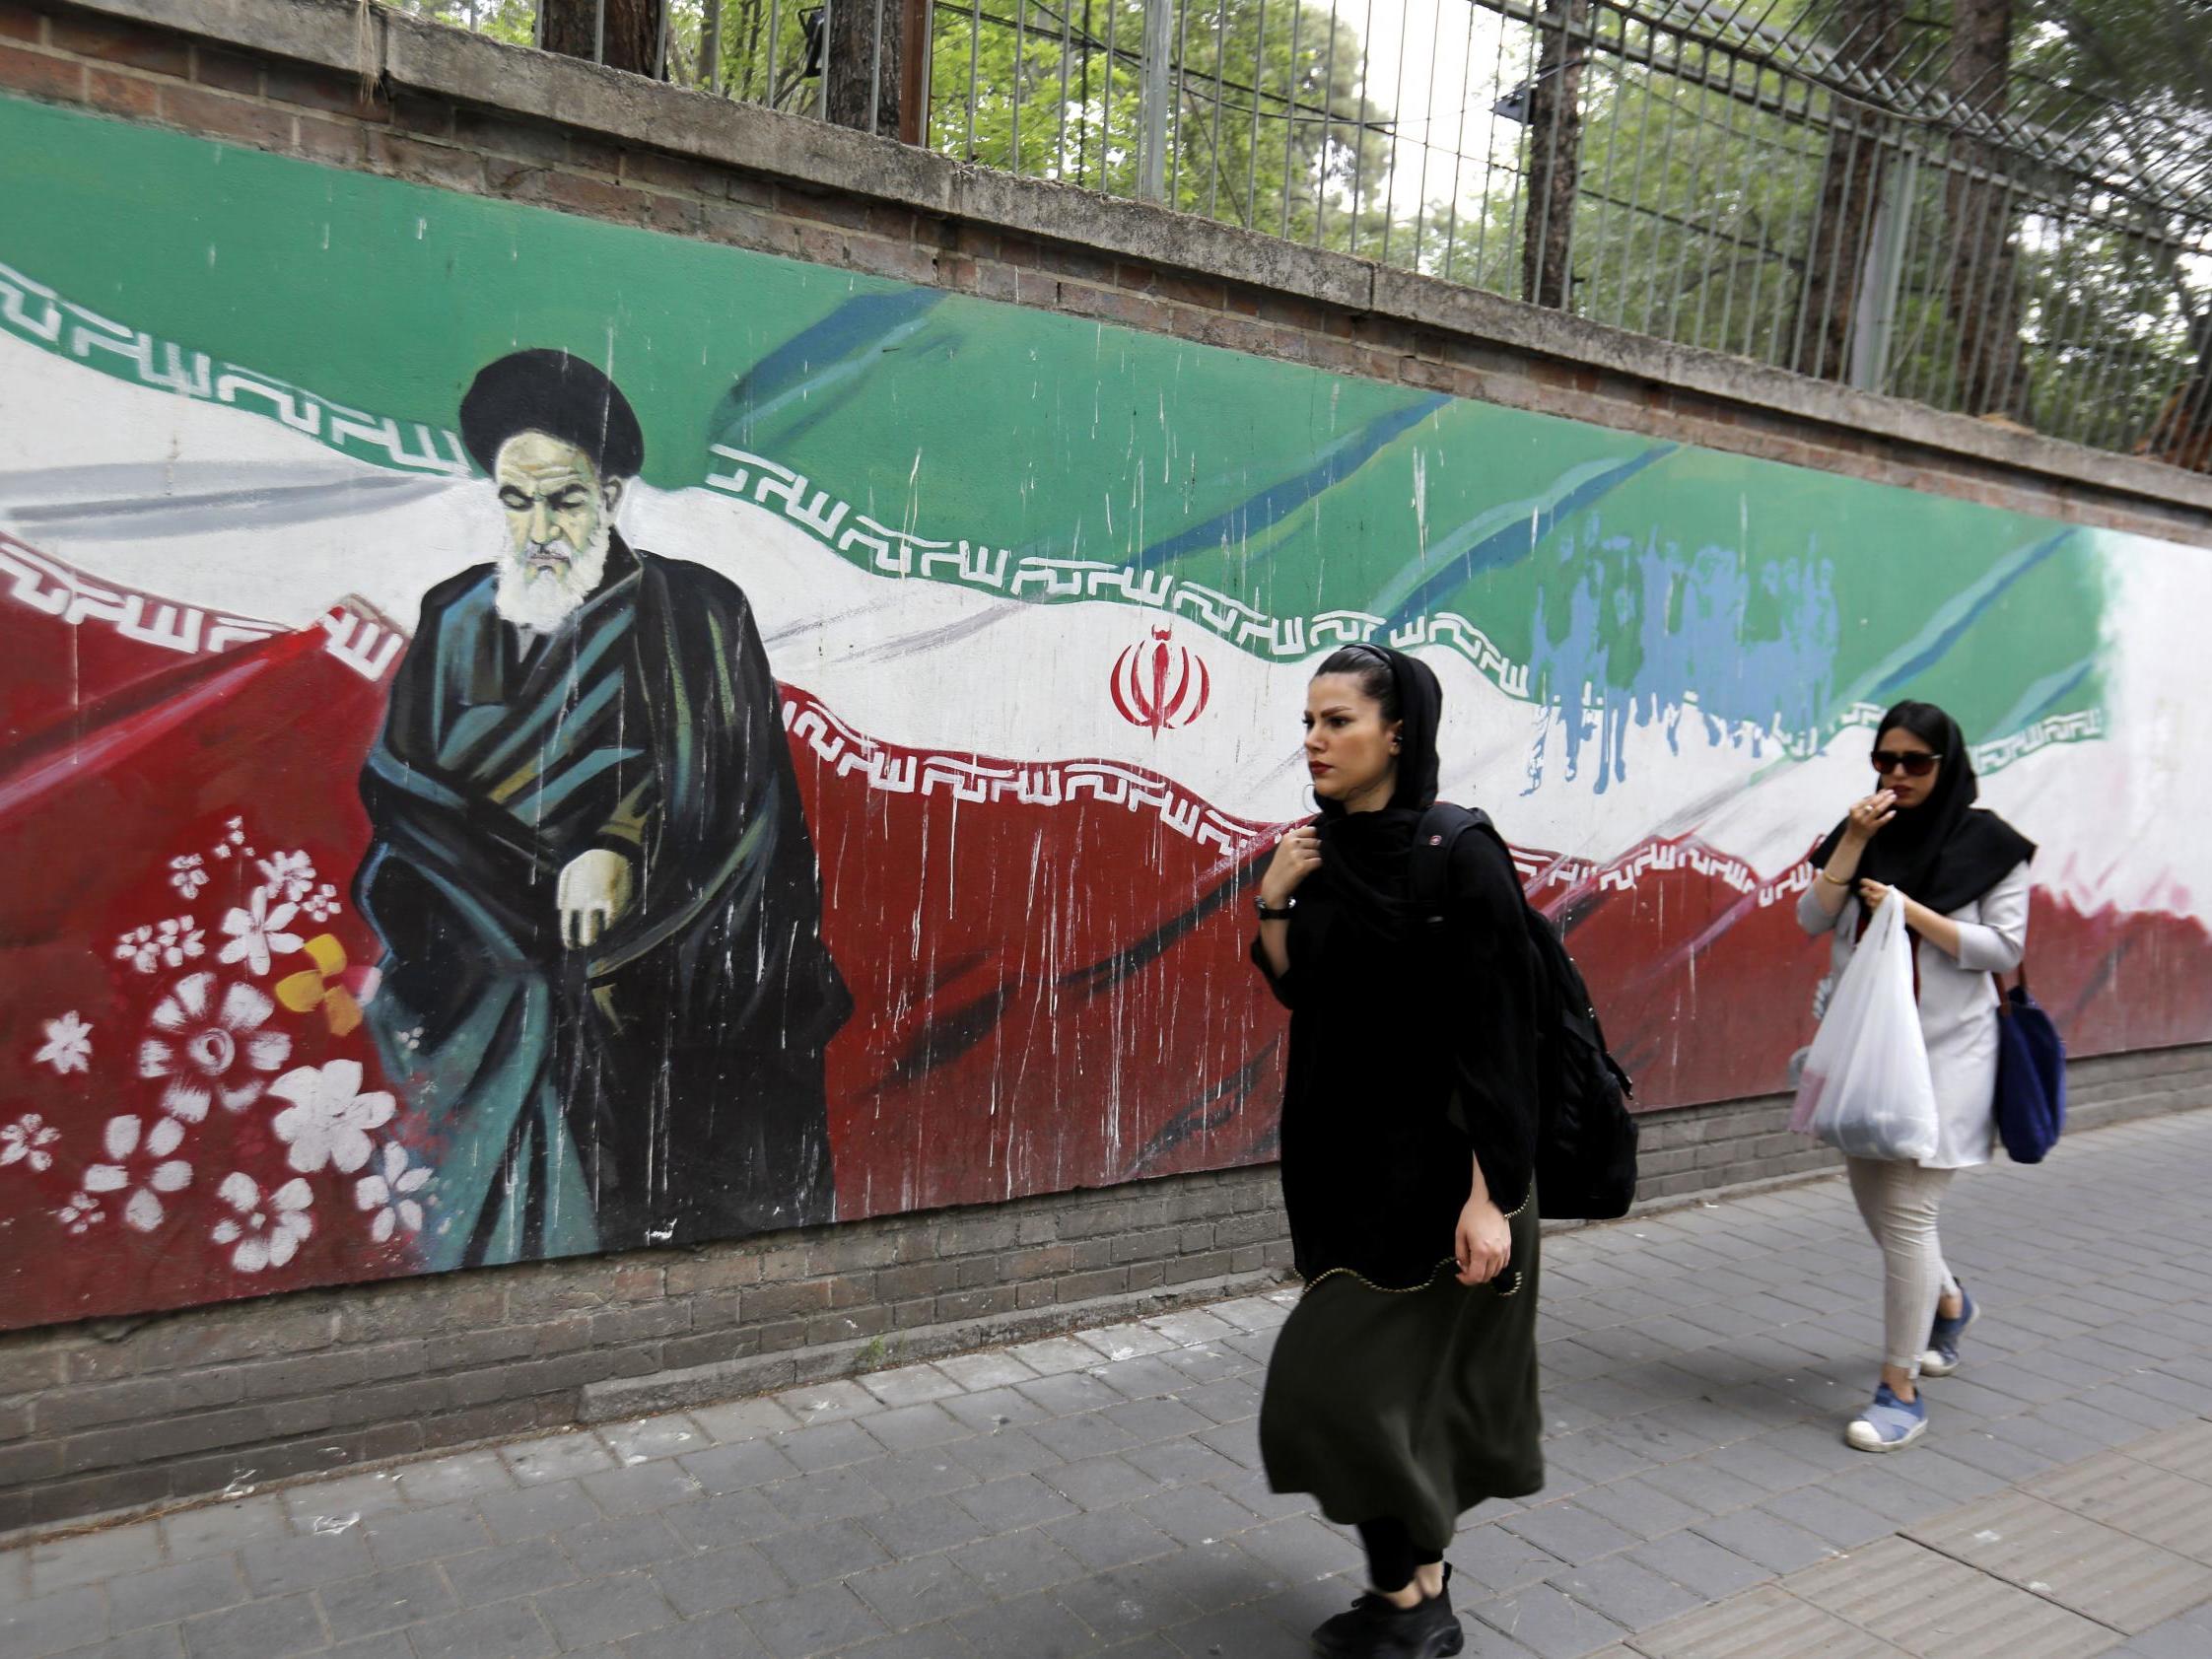 For ordinary Iranians, the brief optimism created by the 2015 international nuclear deal has evaporated, and many are now fearful for the future